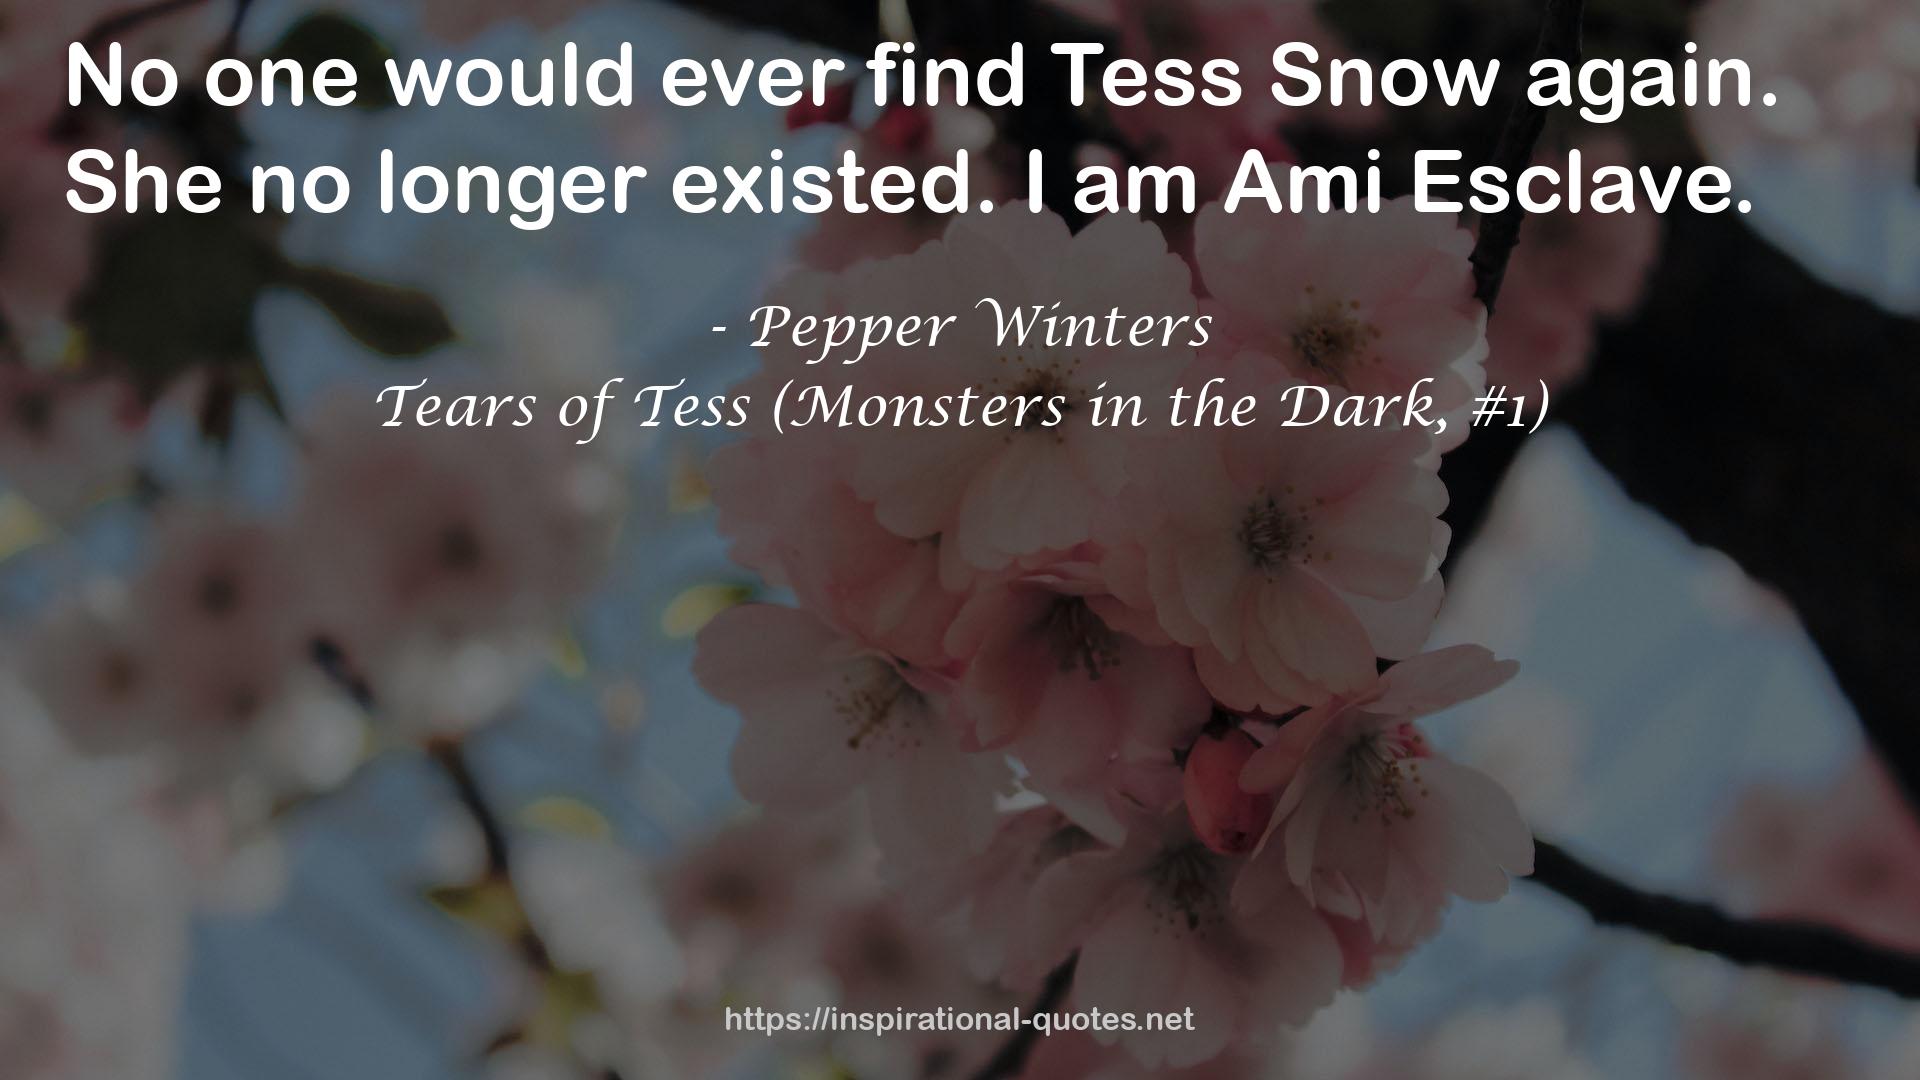 Tears of Tess (Monsters in the Dark, #1) QUOTES